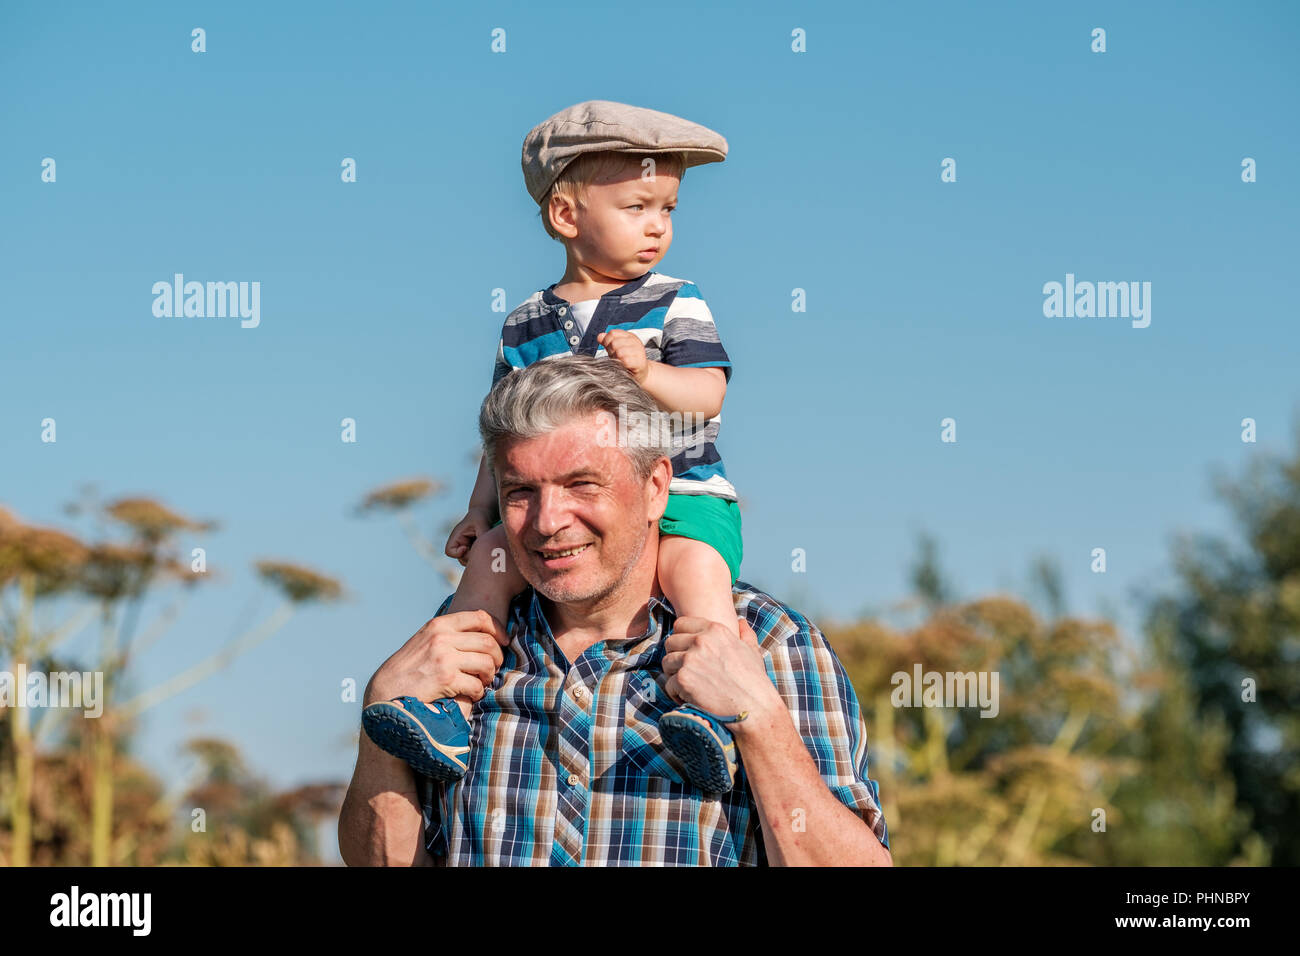 Boy Pretending To Fly While Grandfather Holds Him Over Shoulder High-Res  Stock Photo - Getty Images